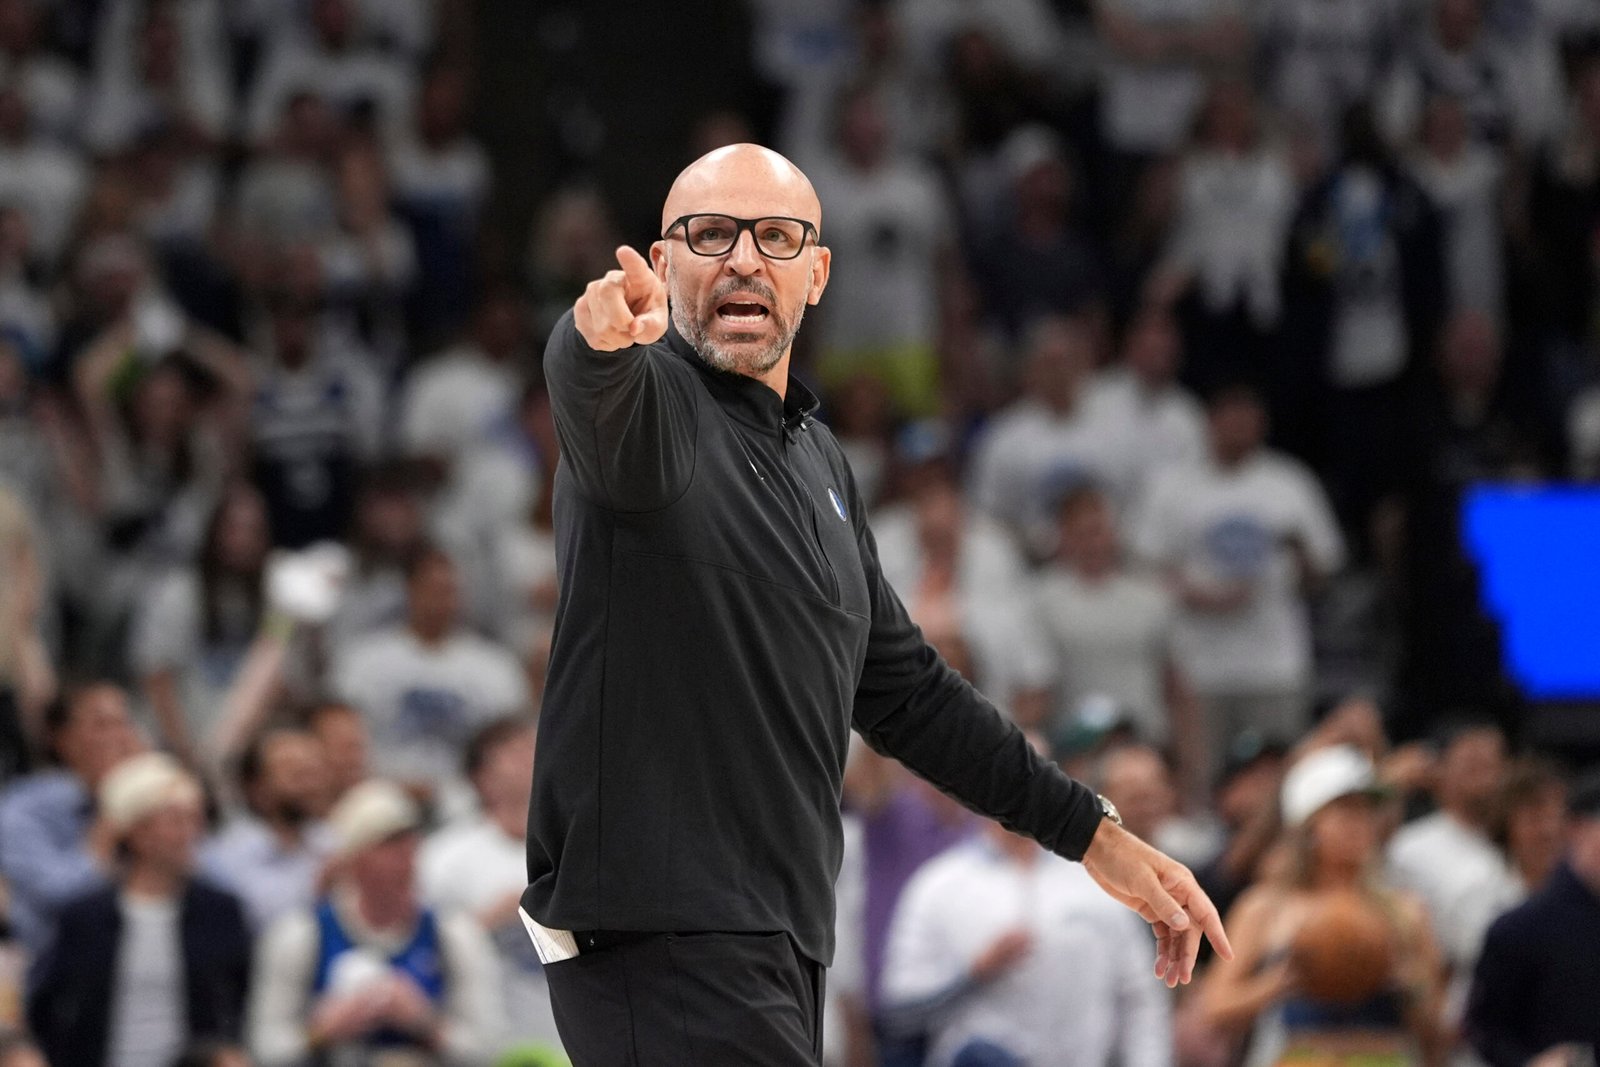 Jason Kidd has chance to join a very small club in NBA Finals